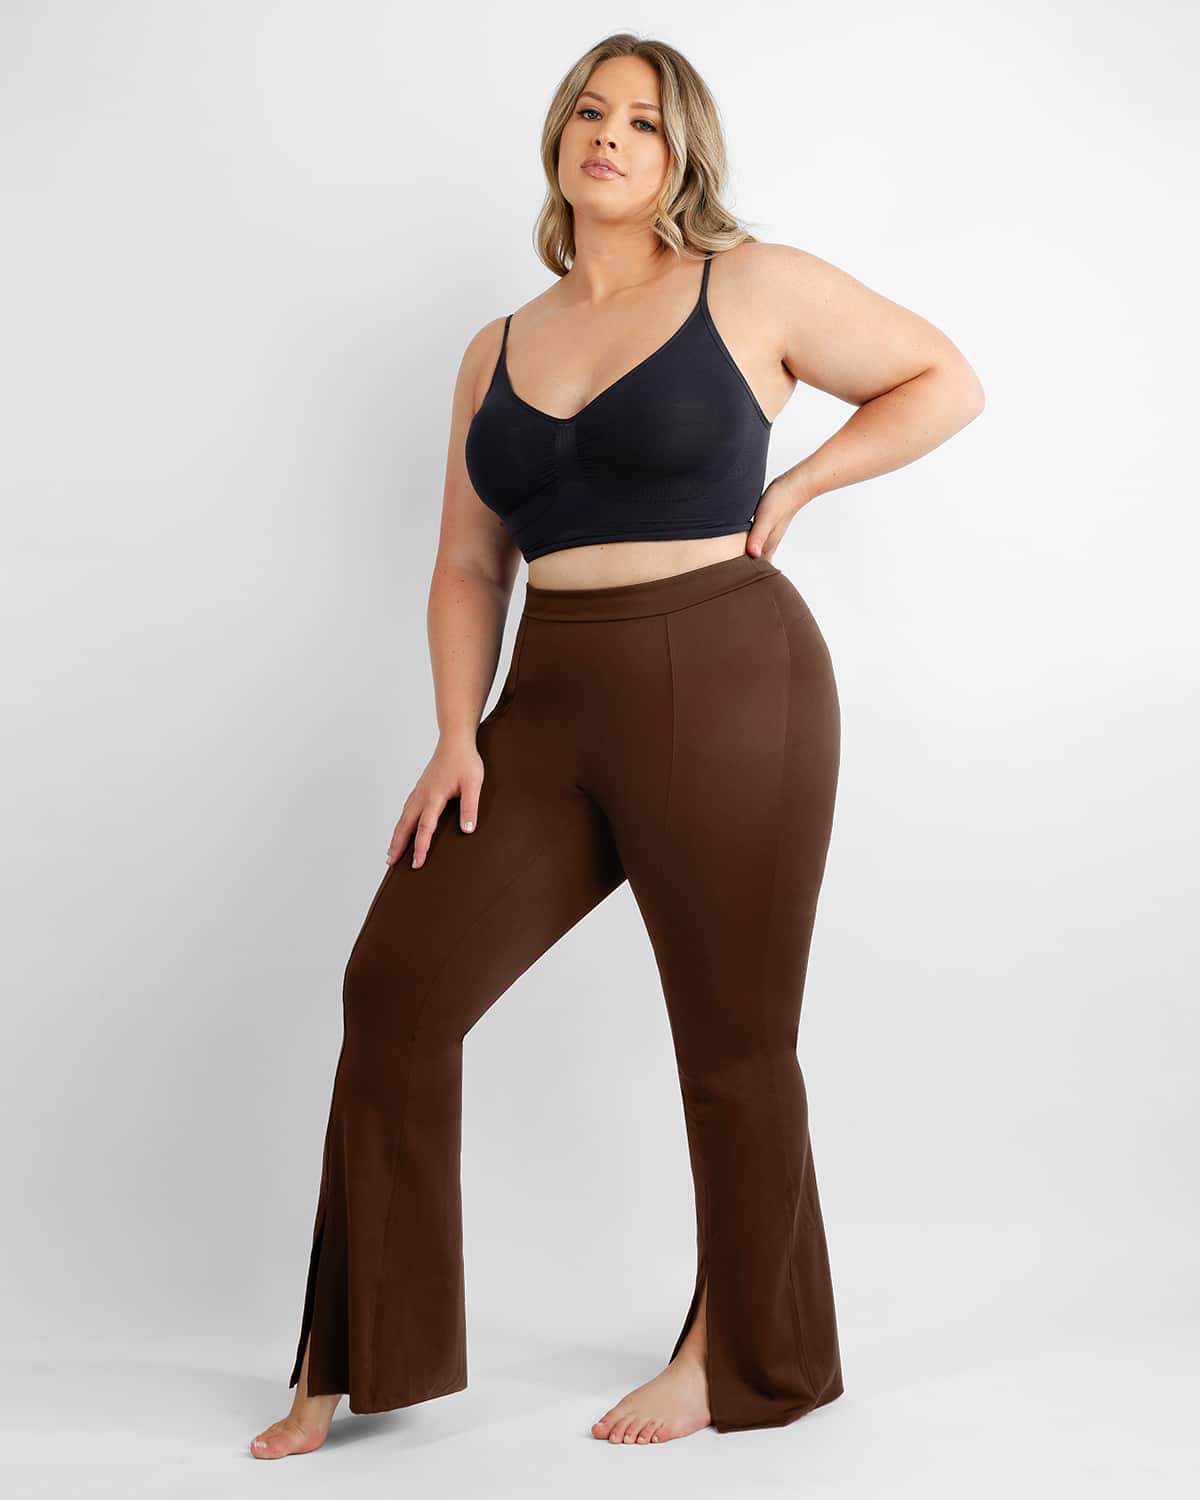 Women's High Waist Stovepipe Weight Loss Hip Hip Pants Shaping Leggings  Shaping Pants Plus Size XS-8XL